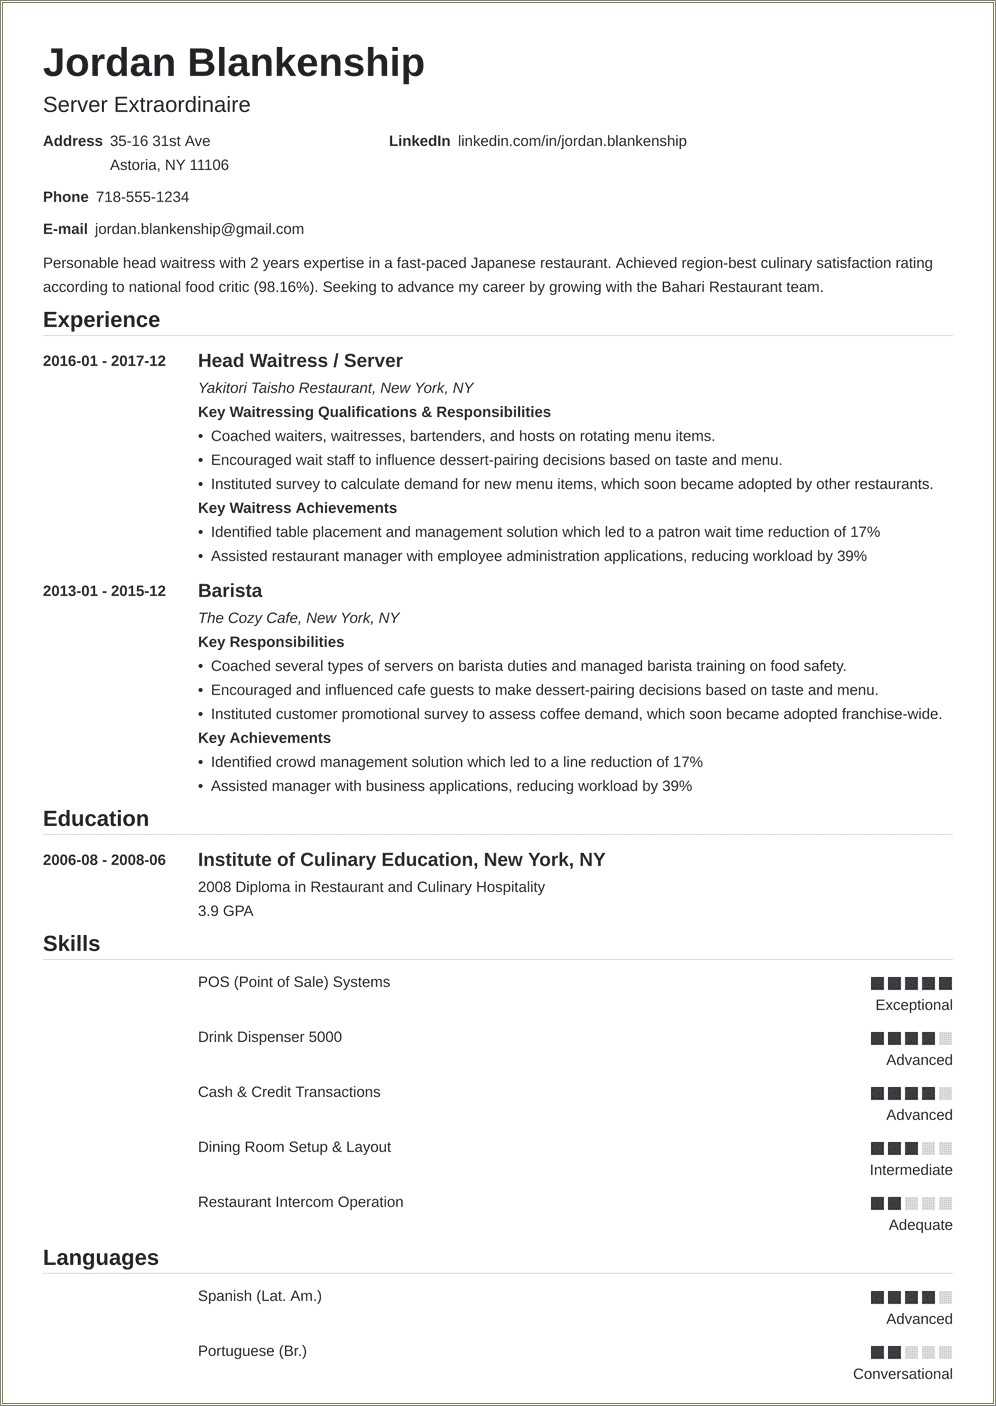 Food Service Position Resume Objective